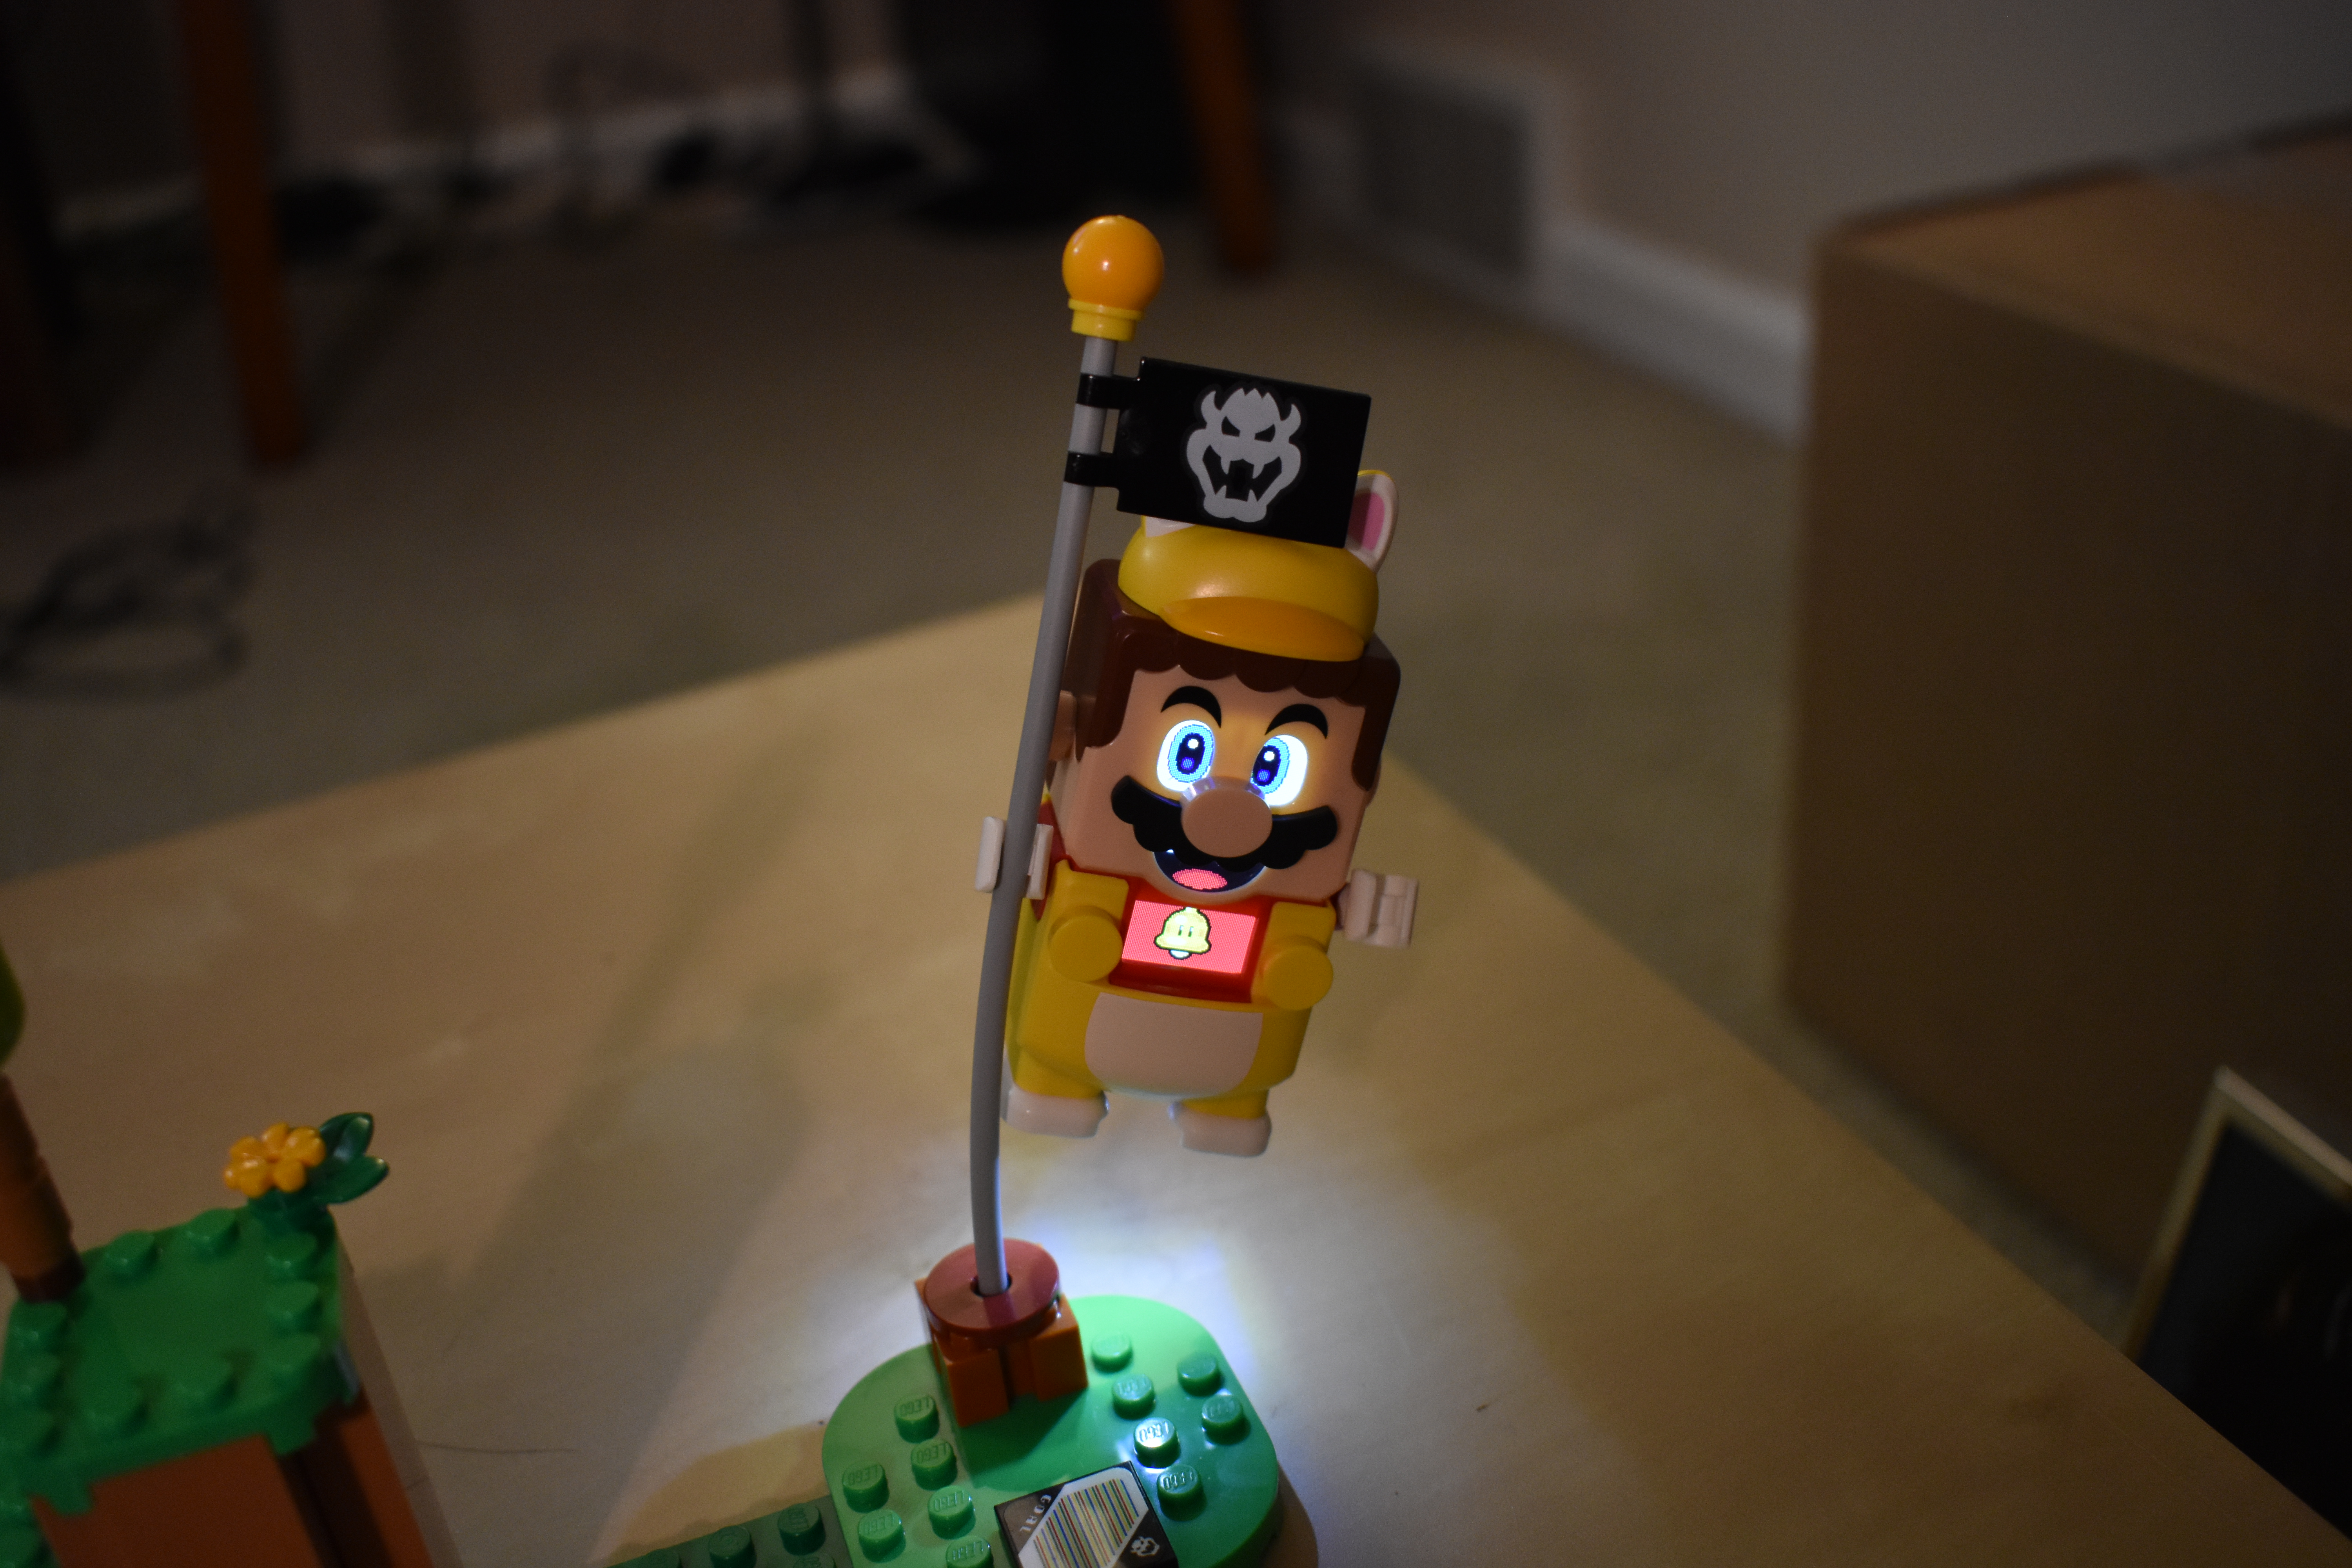 This happens whether the wheel is locked or free-spinning. mario lego cat s...